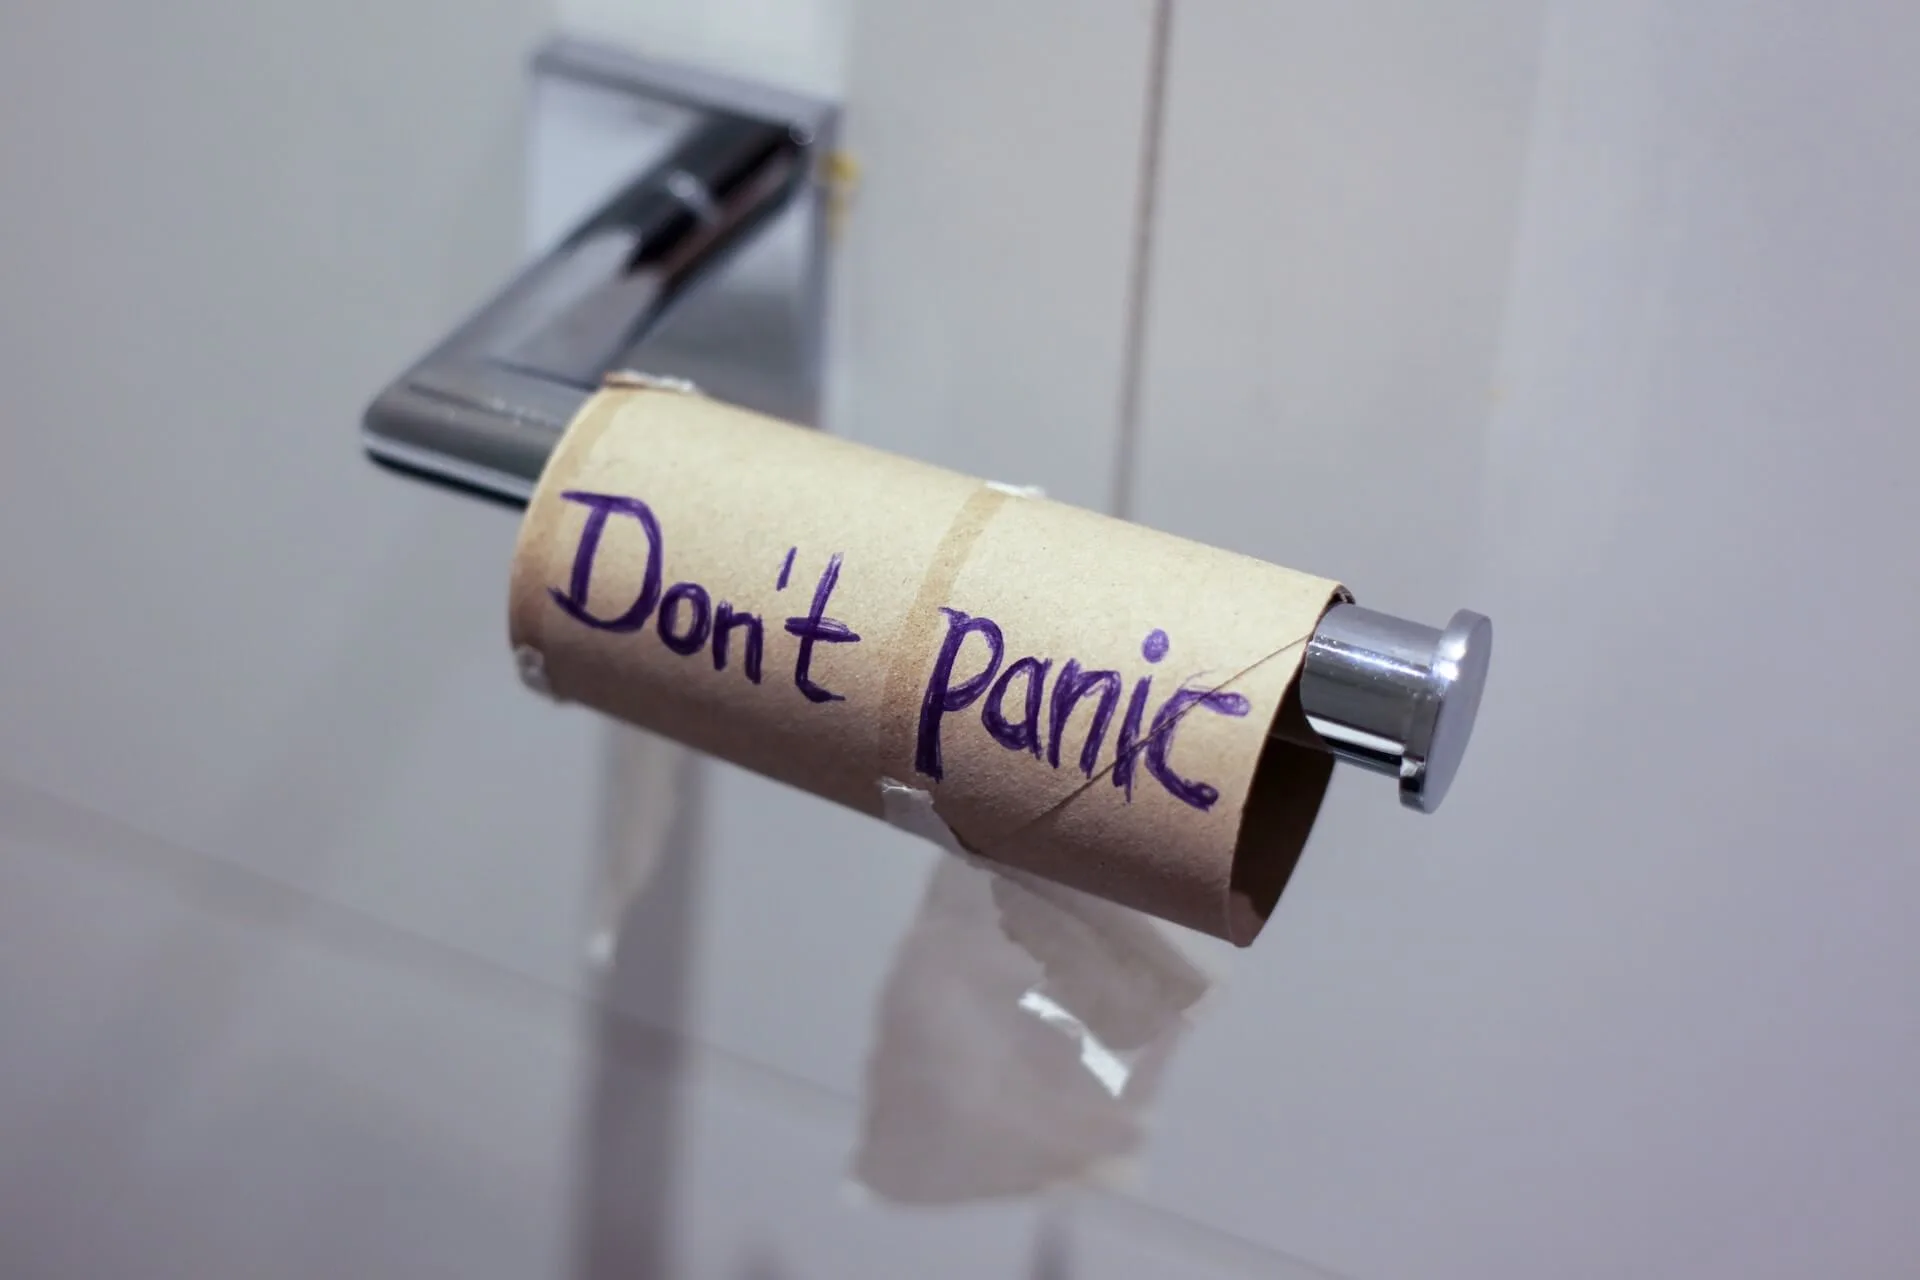 An empty toilet roll in the school bathroom with the words "Don't Panic" written on it.